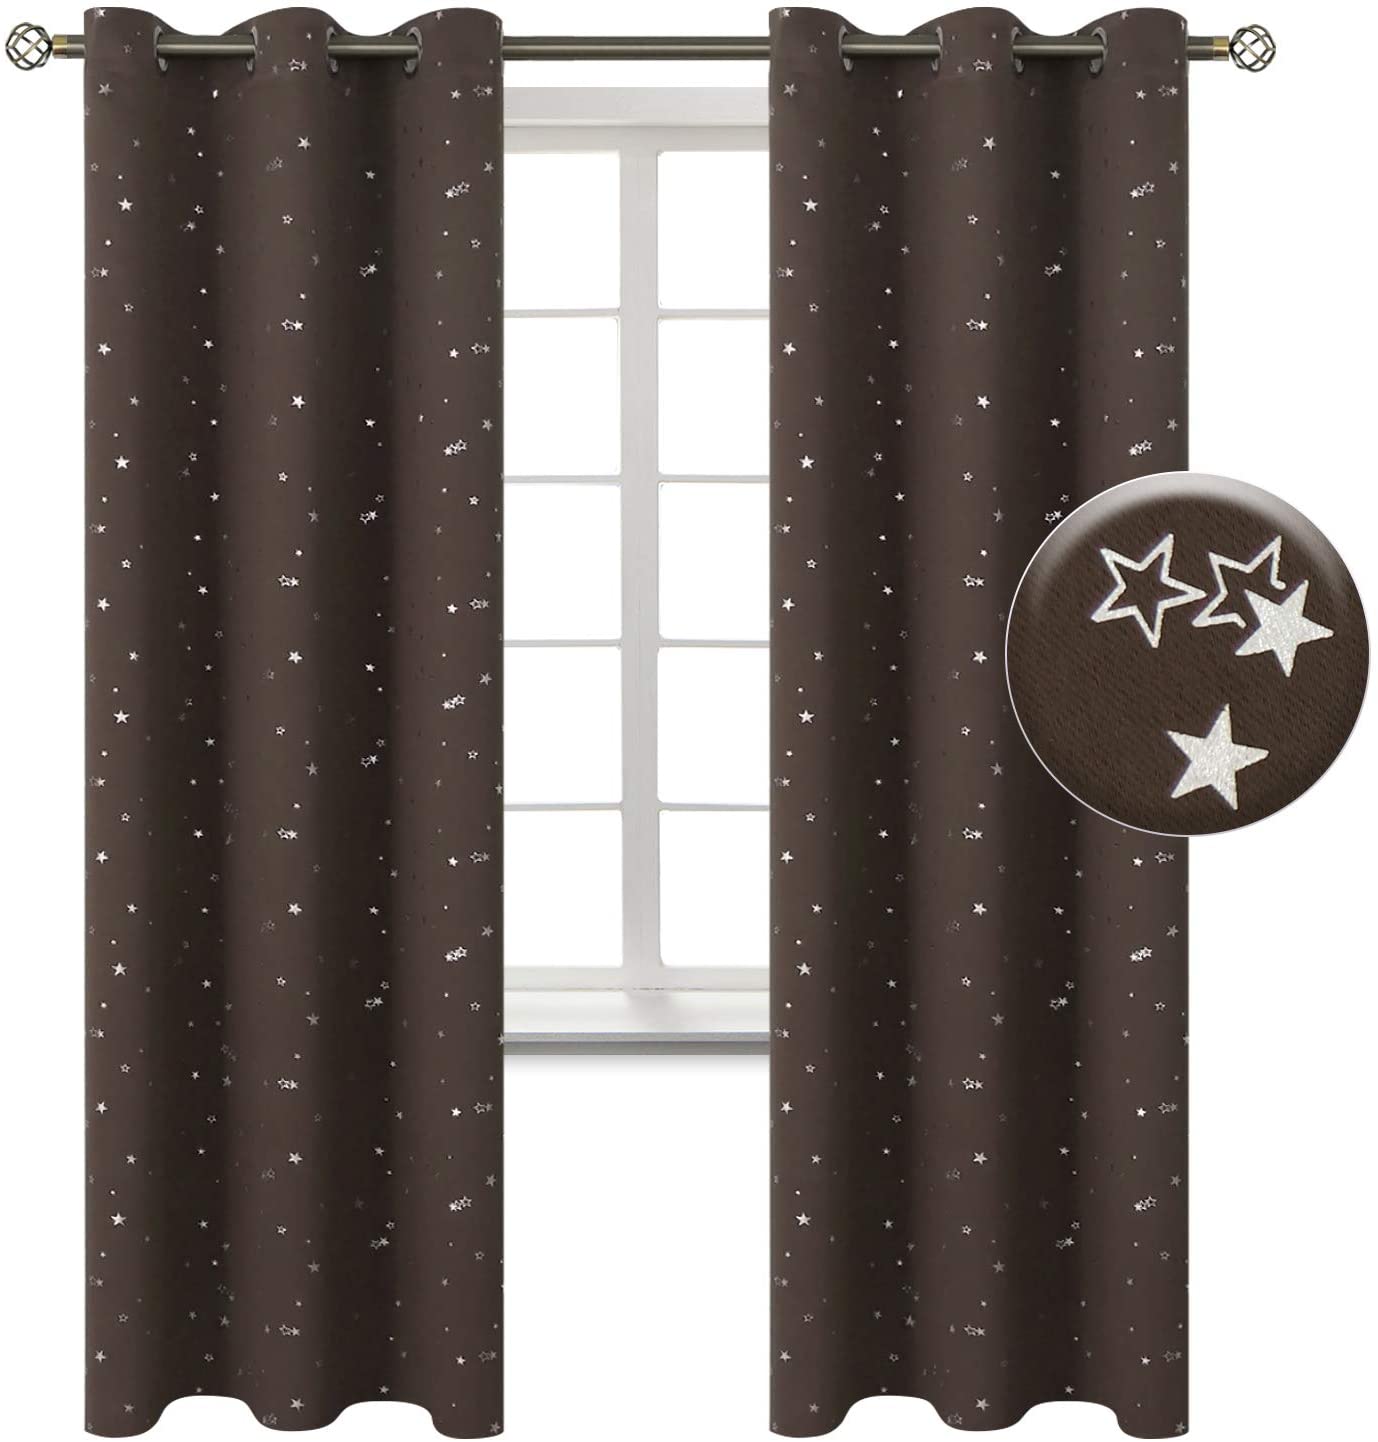 BGment Kids Blackout Curtains for Bedroom Grommet Thermal Insulated Silver Sta